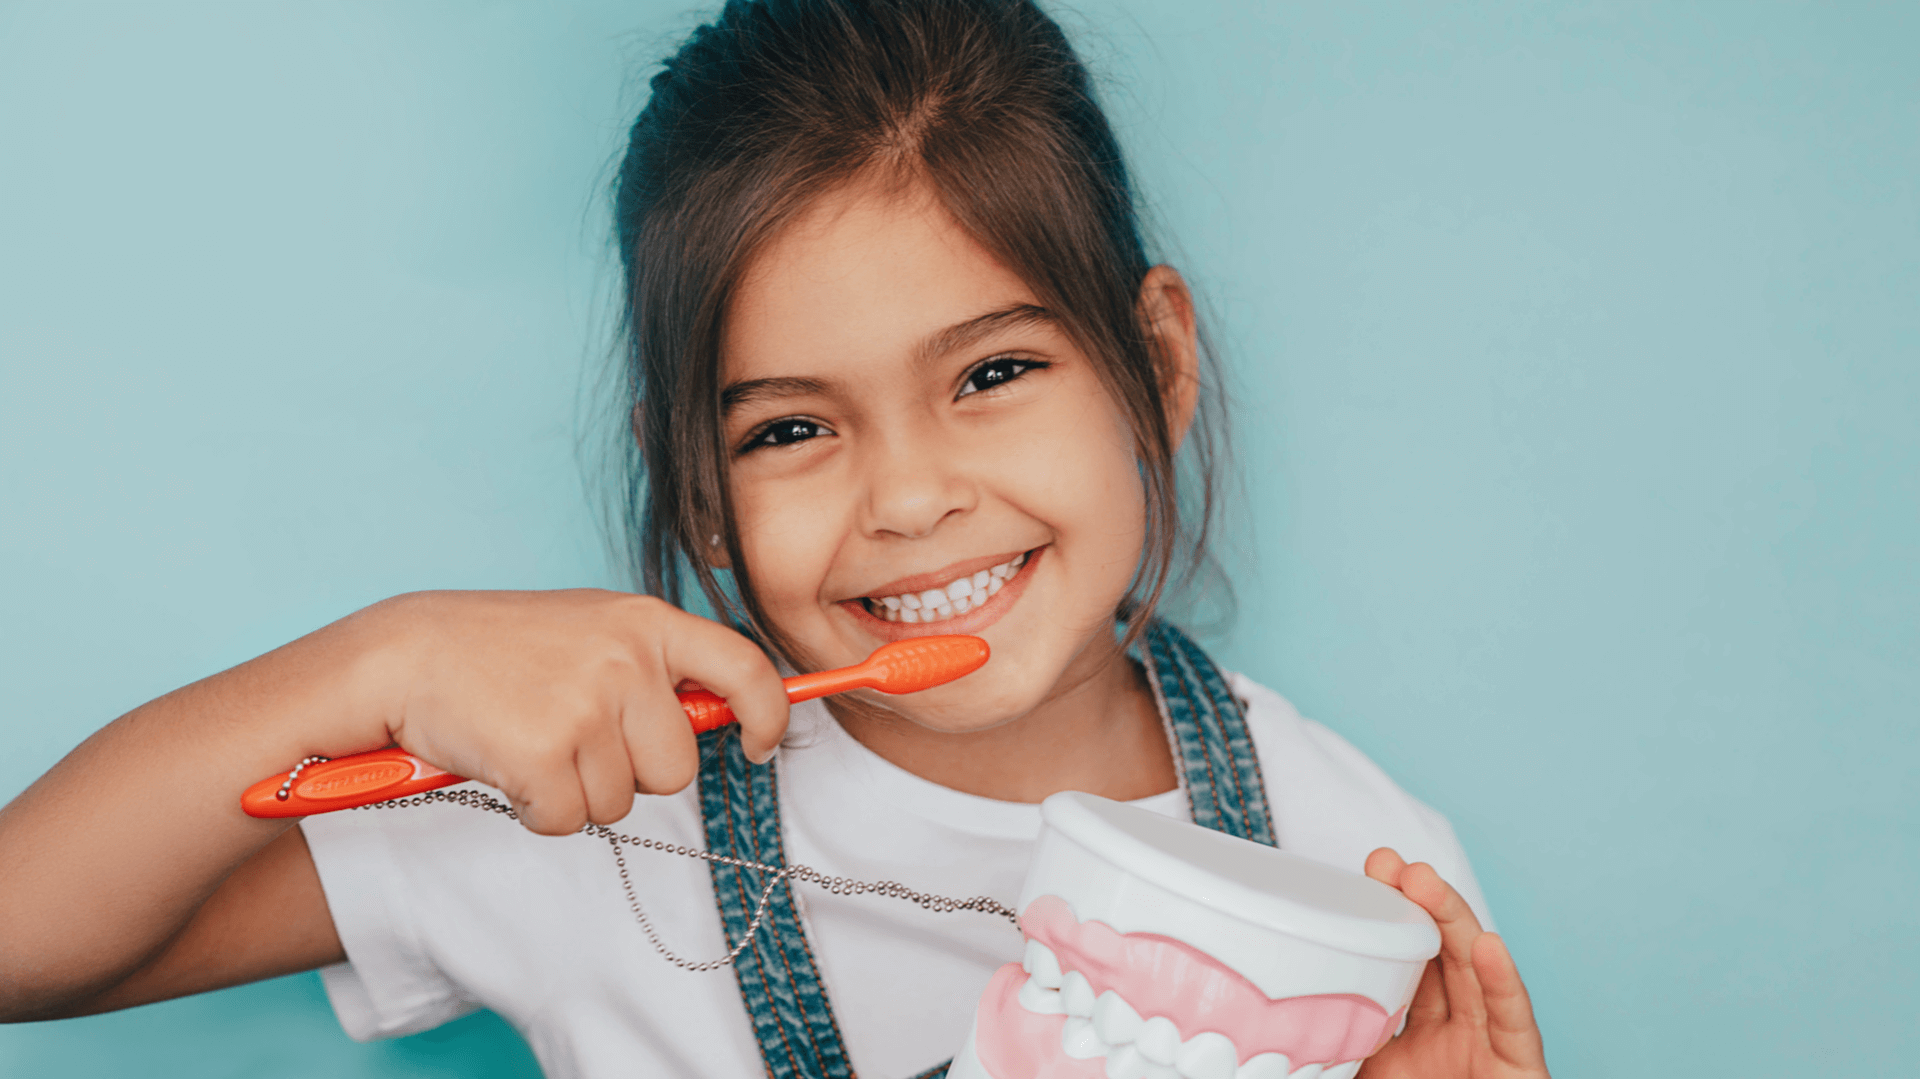 If you teach your child good dental hygiene habits early in life, they will have better overall health for the rest of their lives.